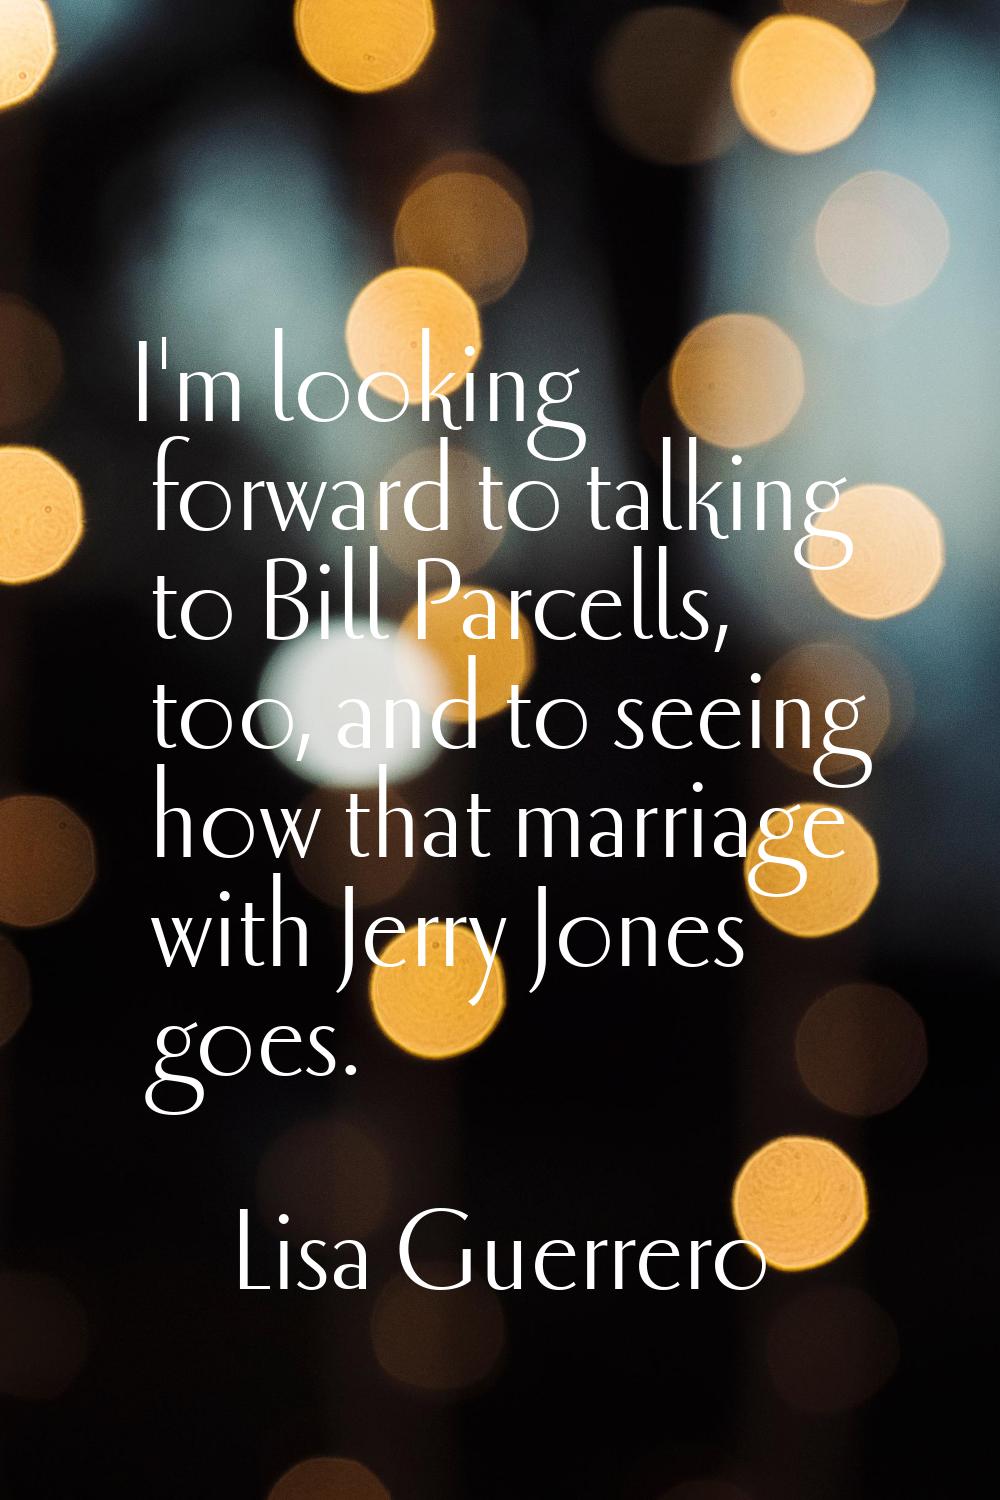 I'm looking forward to talking to Bill Parcells, too, and to seeing how that marriage with Jerry Jo